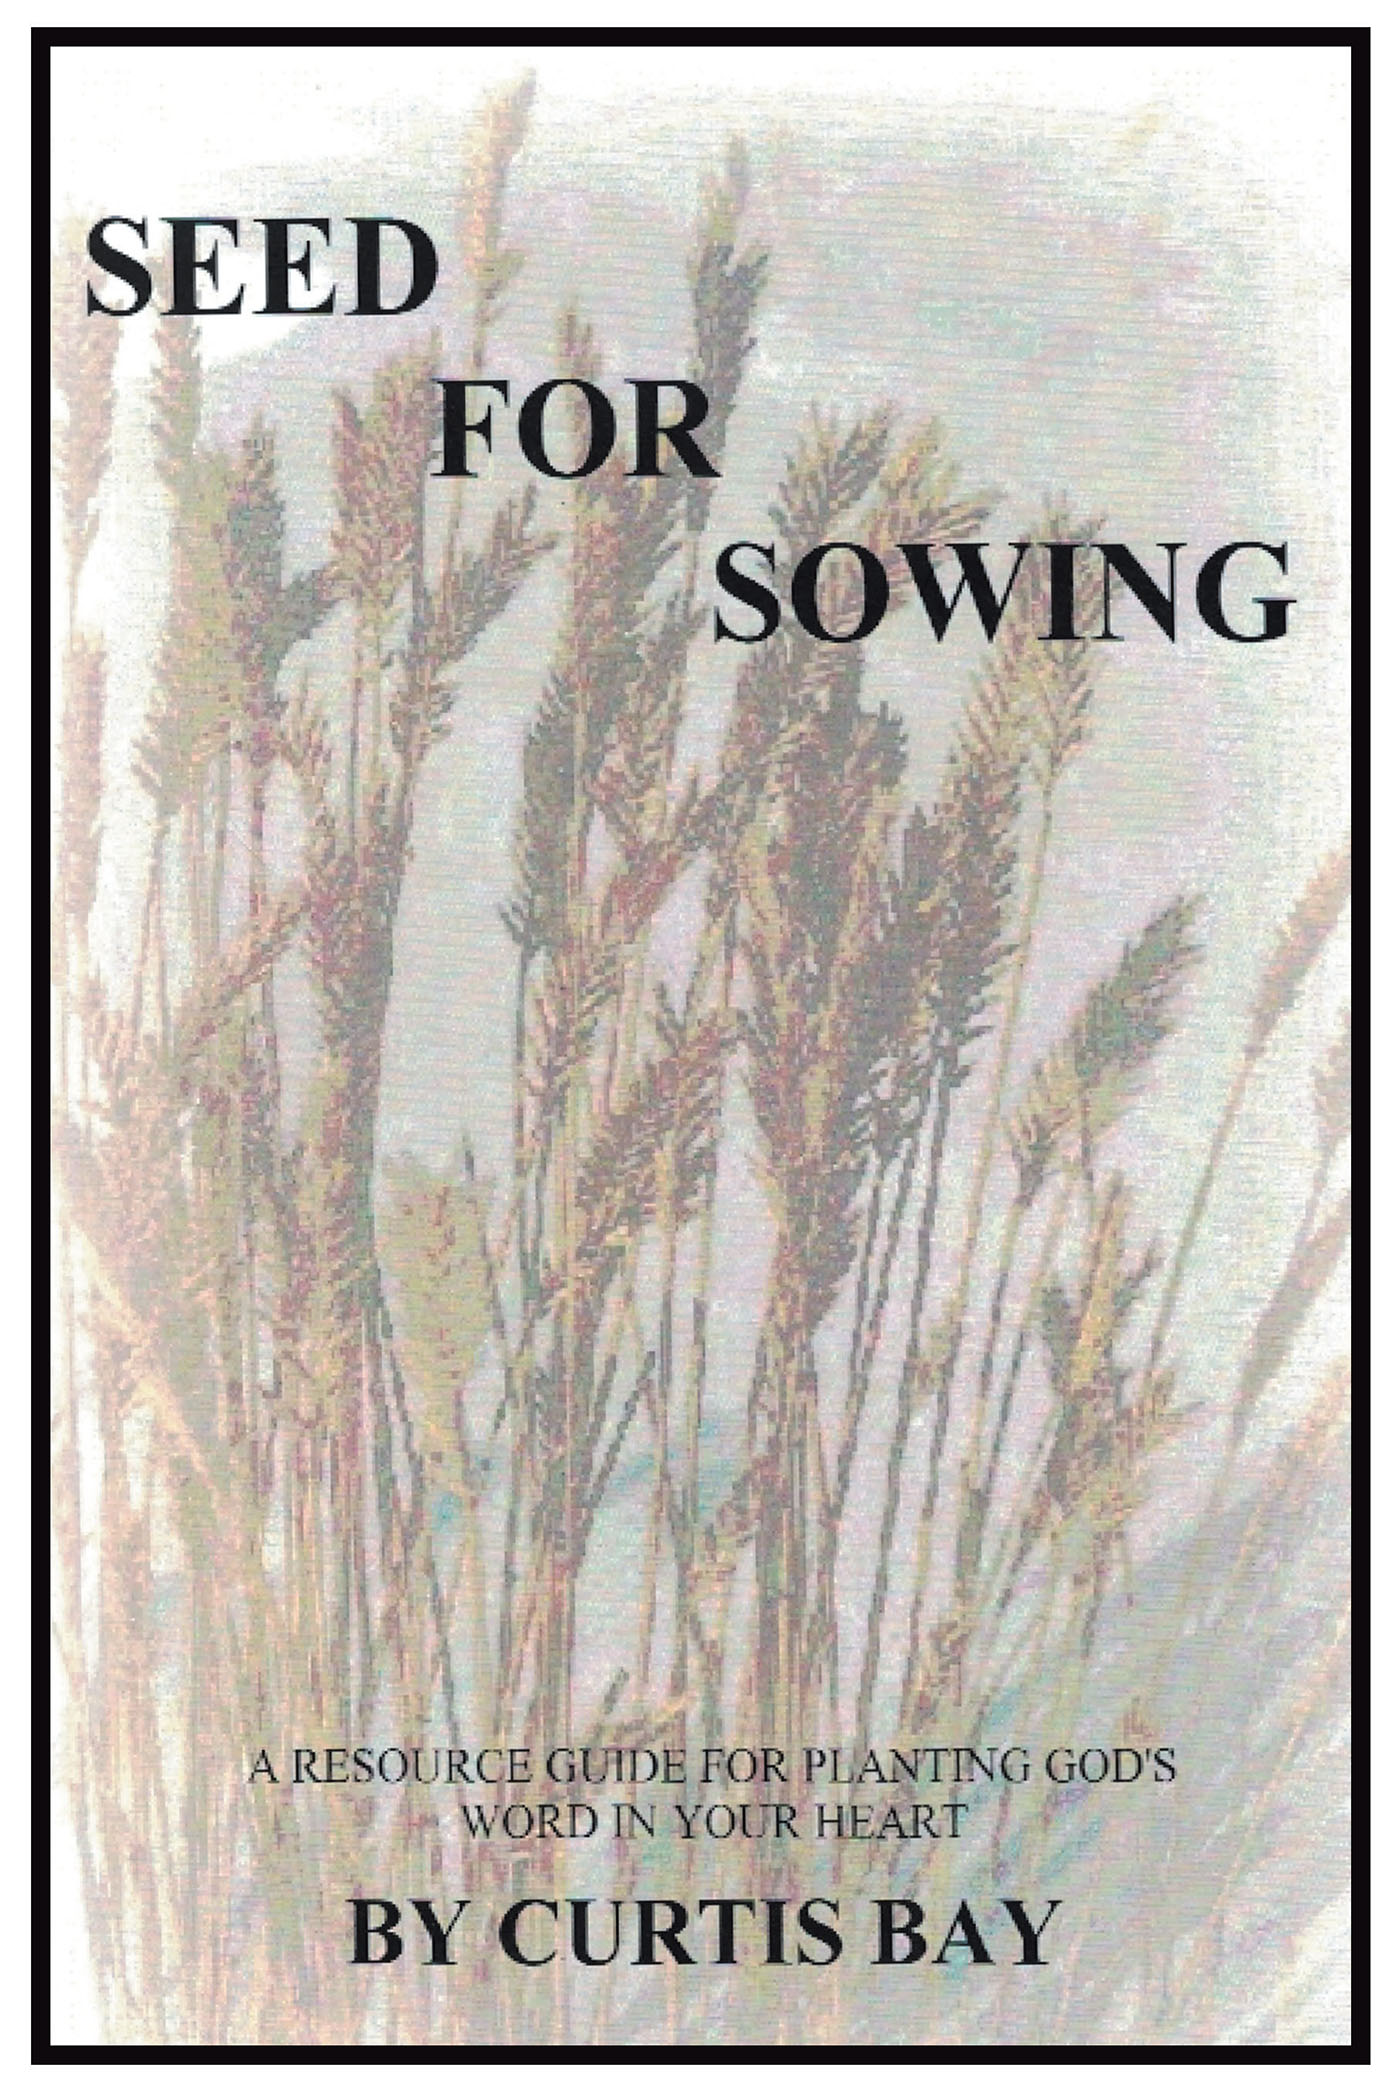 Curtis Bay’s Newly Released "Seed for Sowing" is a Powerful Guide to Cultivating Faith and Victory in Christ